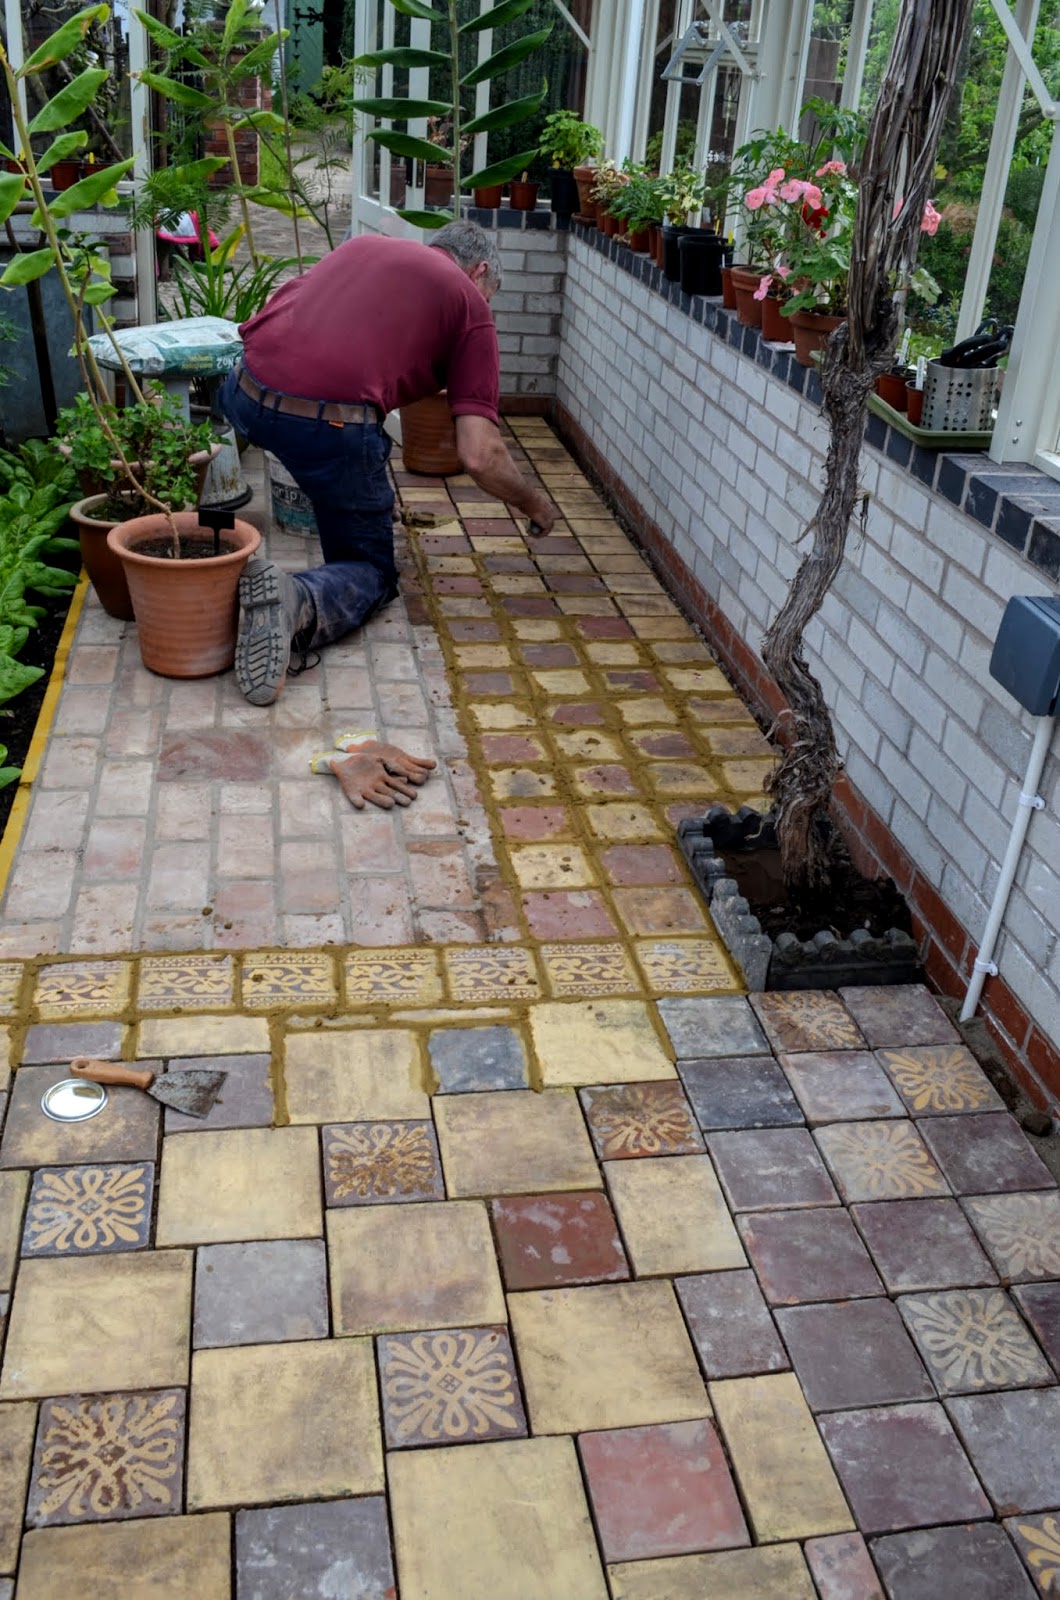 Pear Tree Cottage Garden: Kyle's Tiles (& others) Recycled ...